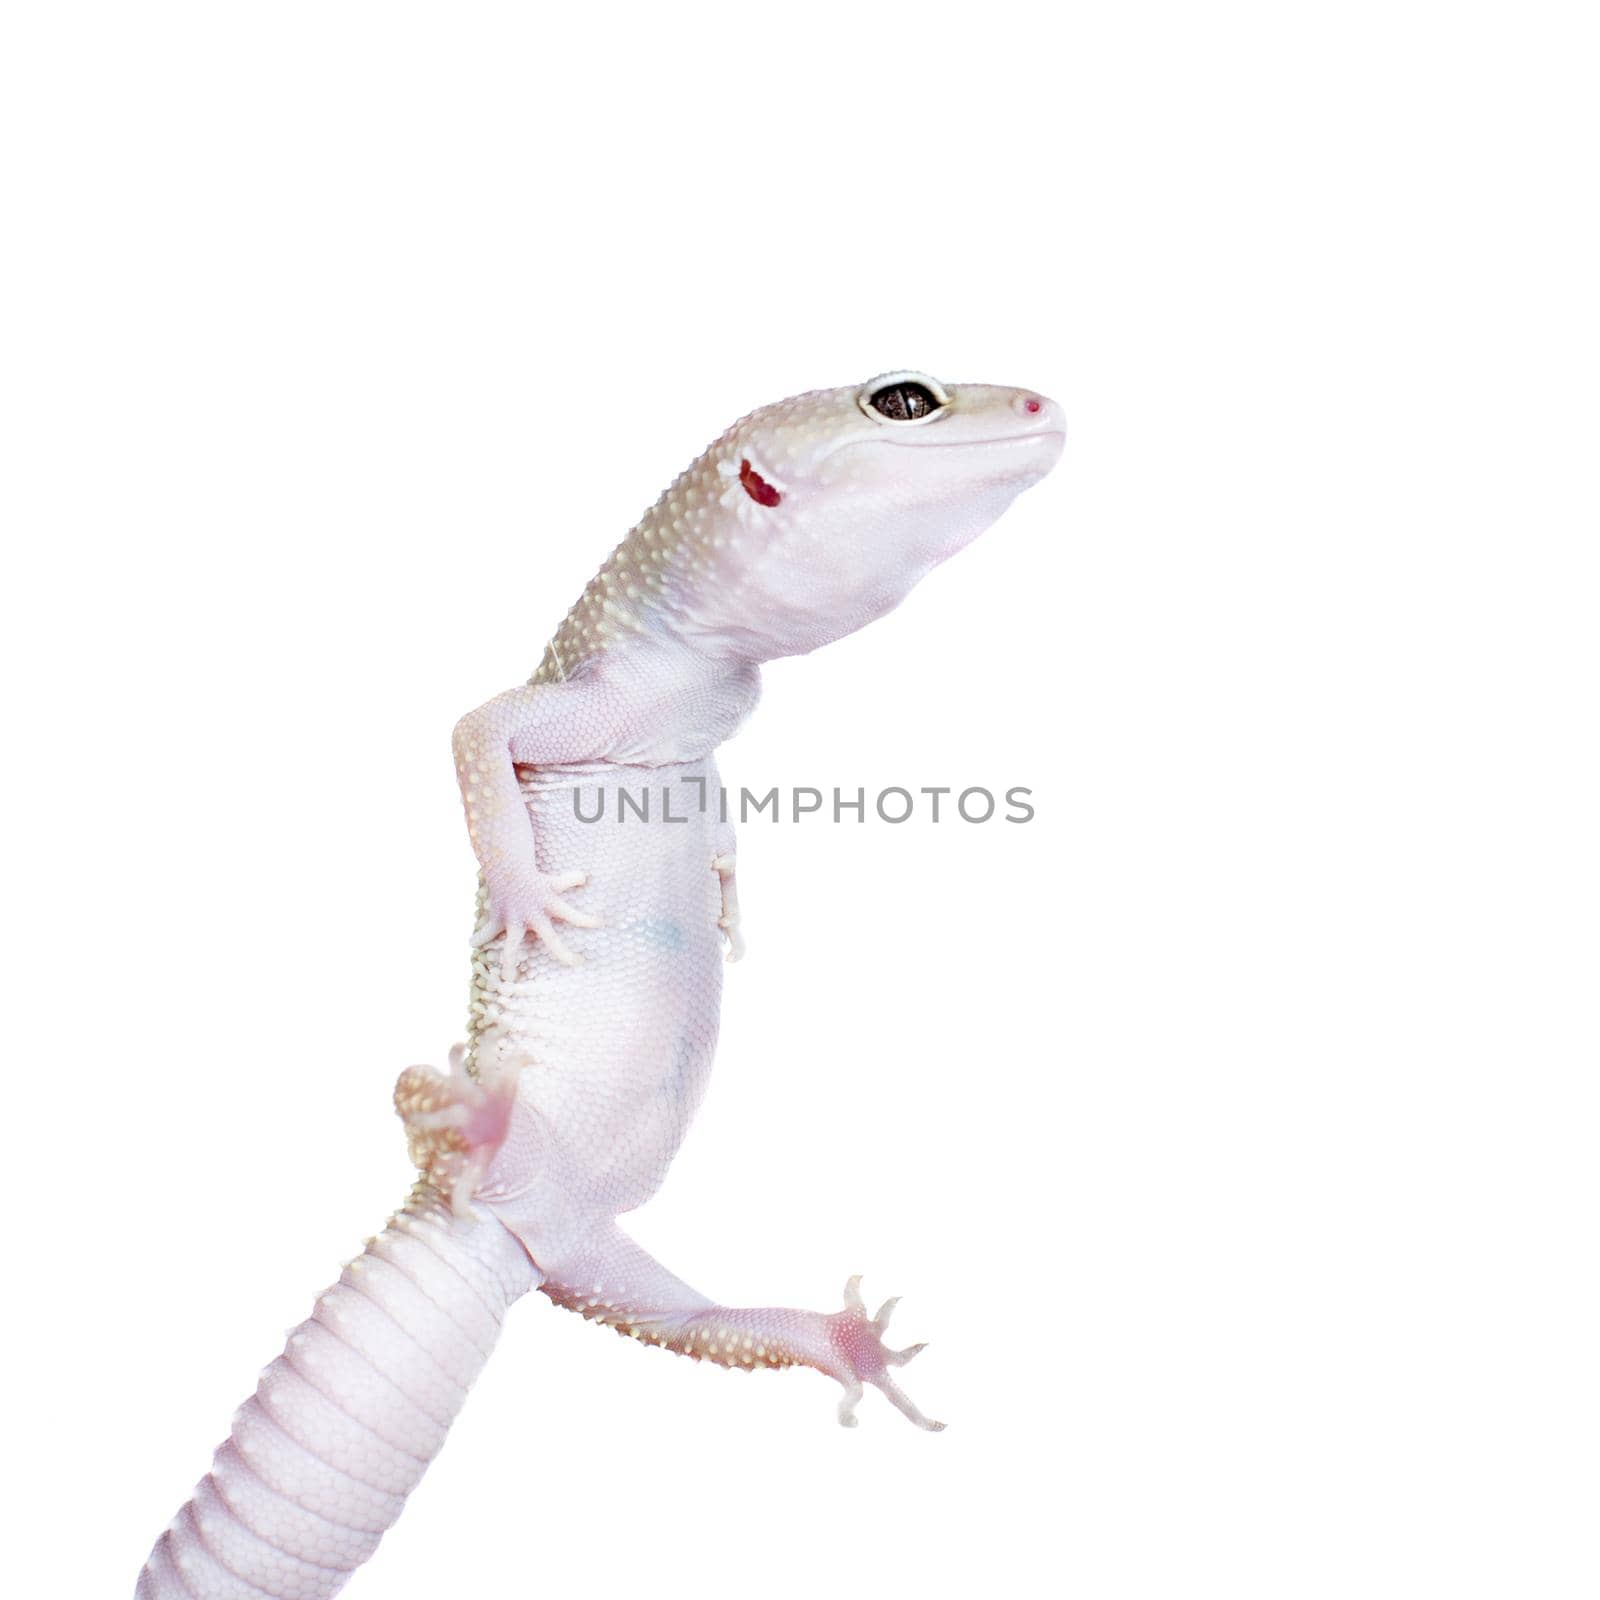 Leopard Gecko dancing on a white background by RosaJay